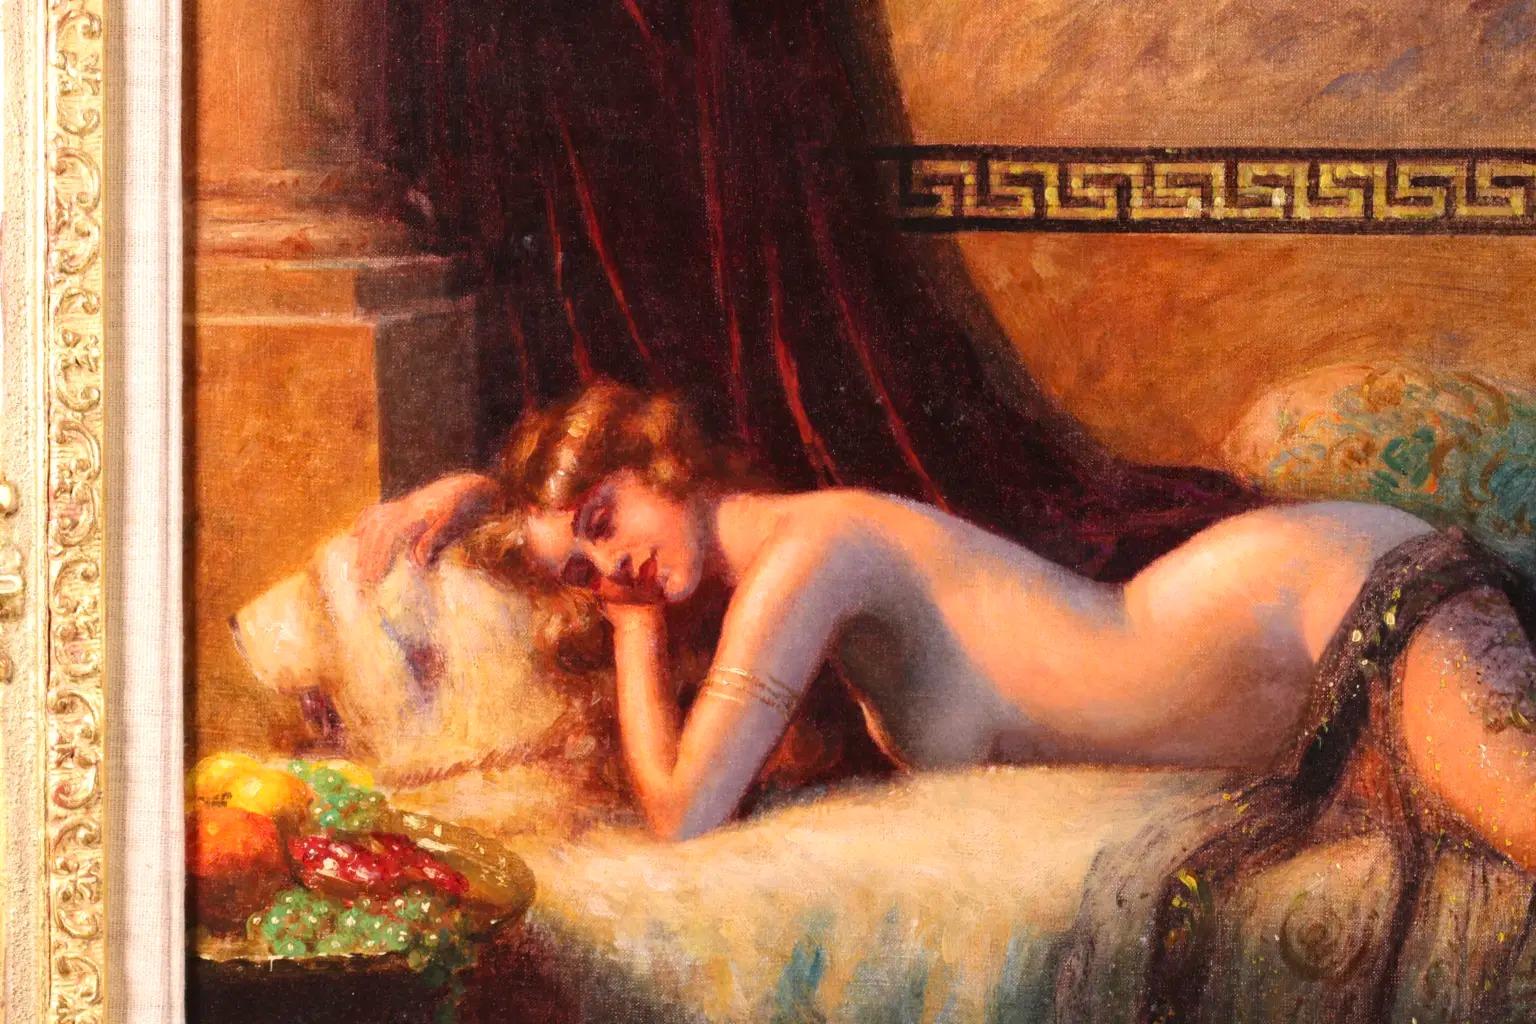 Signed nude in interior oil on canvas circa 1900 by French academic painter Delphin Enjolras. The piece depicts a red-haired nude resting on a bed in a lush boudoir with a sheer scarf draped over her. a deep red velvet curtain hangs behind her and a